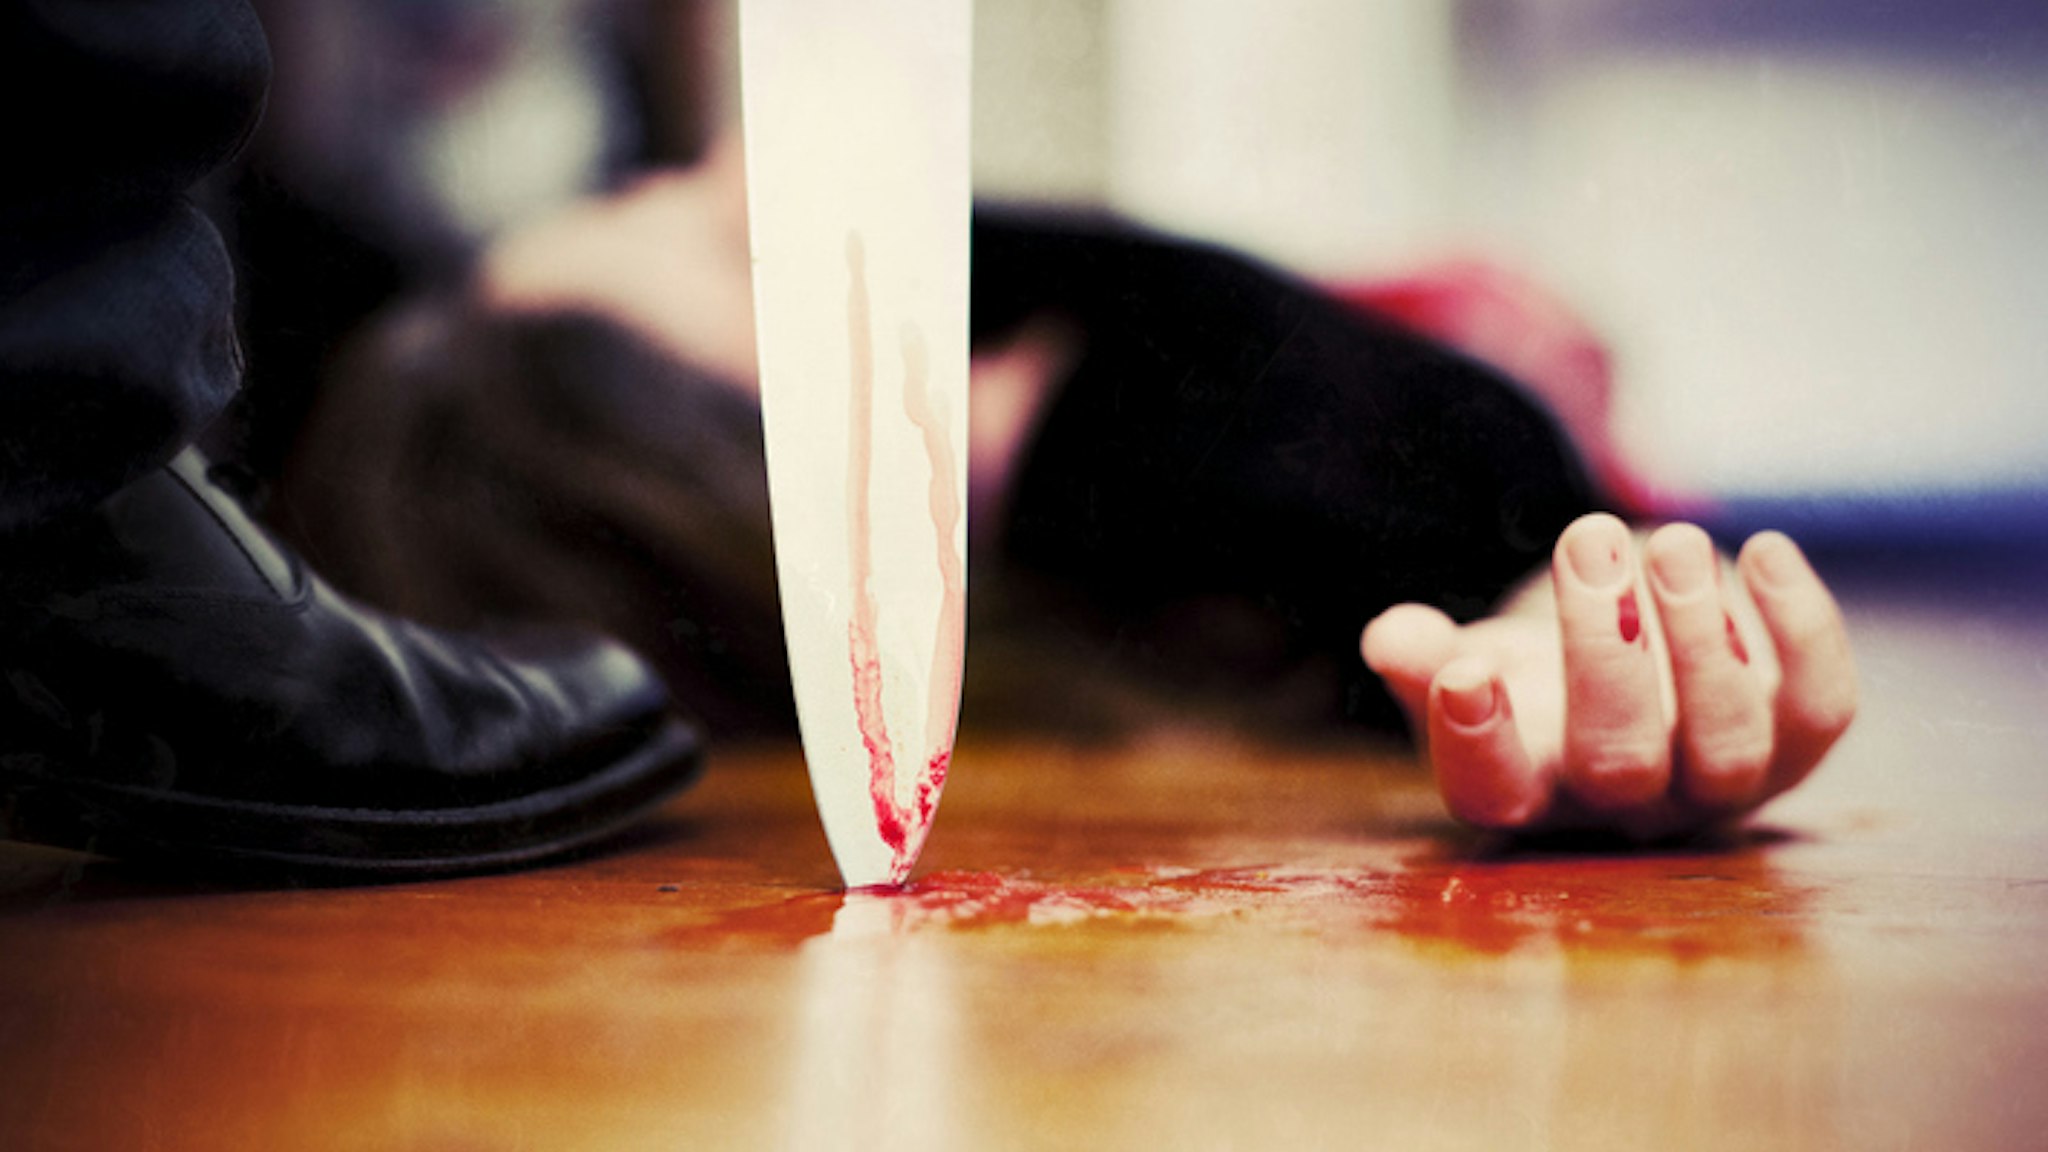 "Close up on a bloody knife planted on a wooden floor, a killing scene"